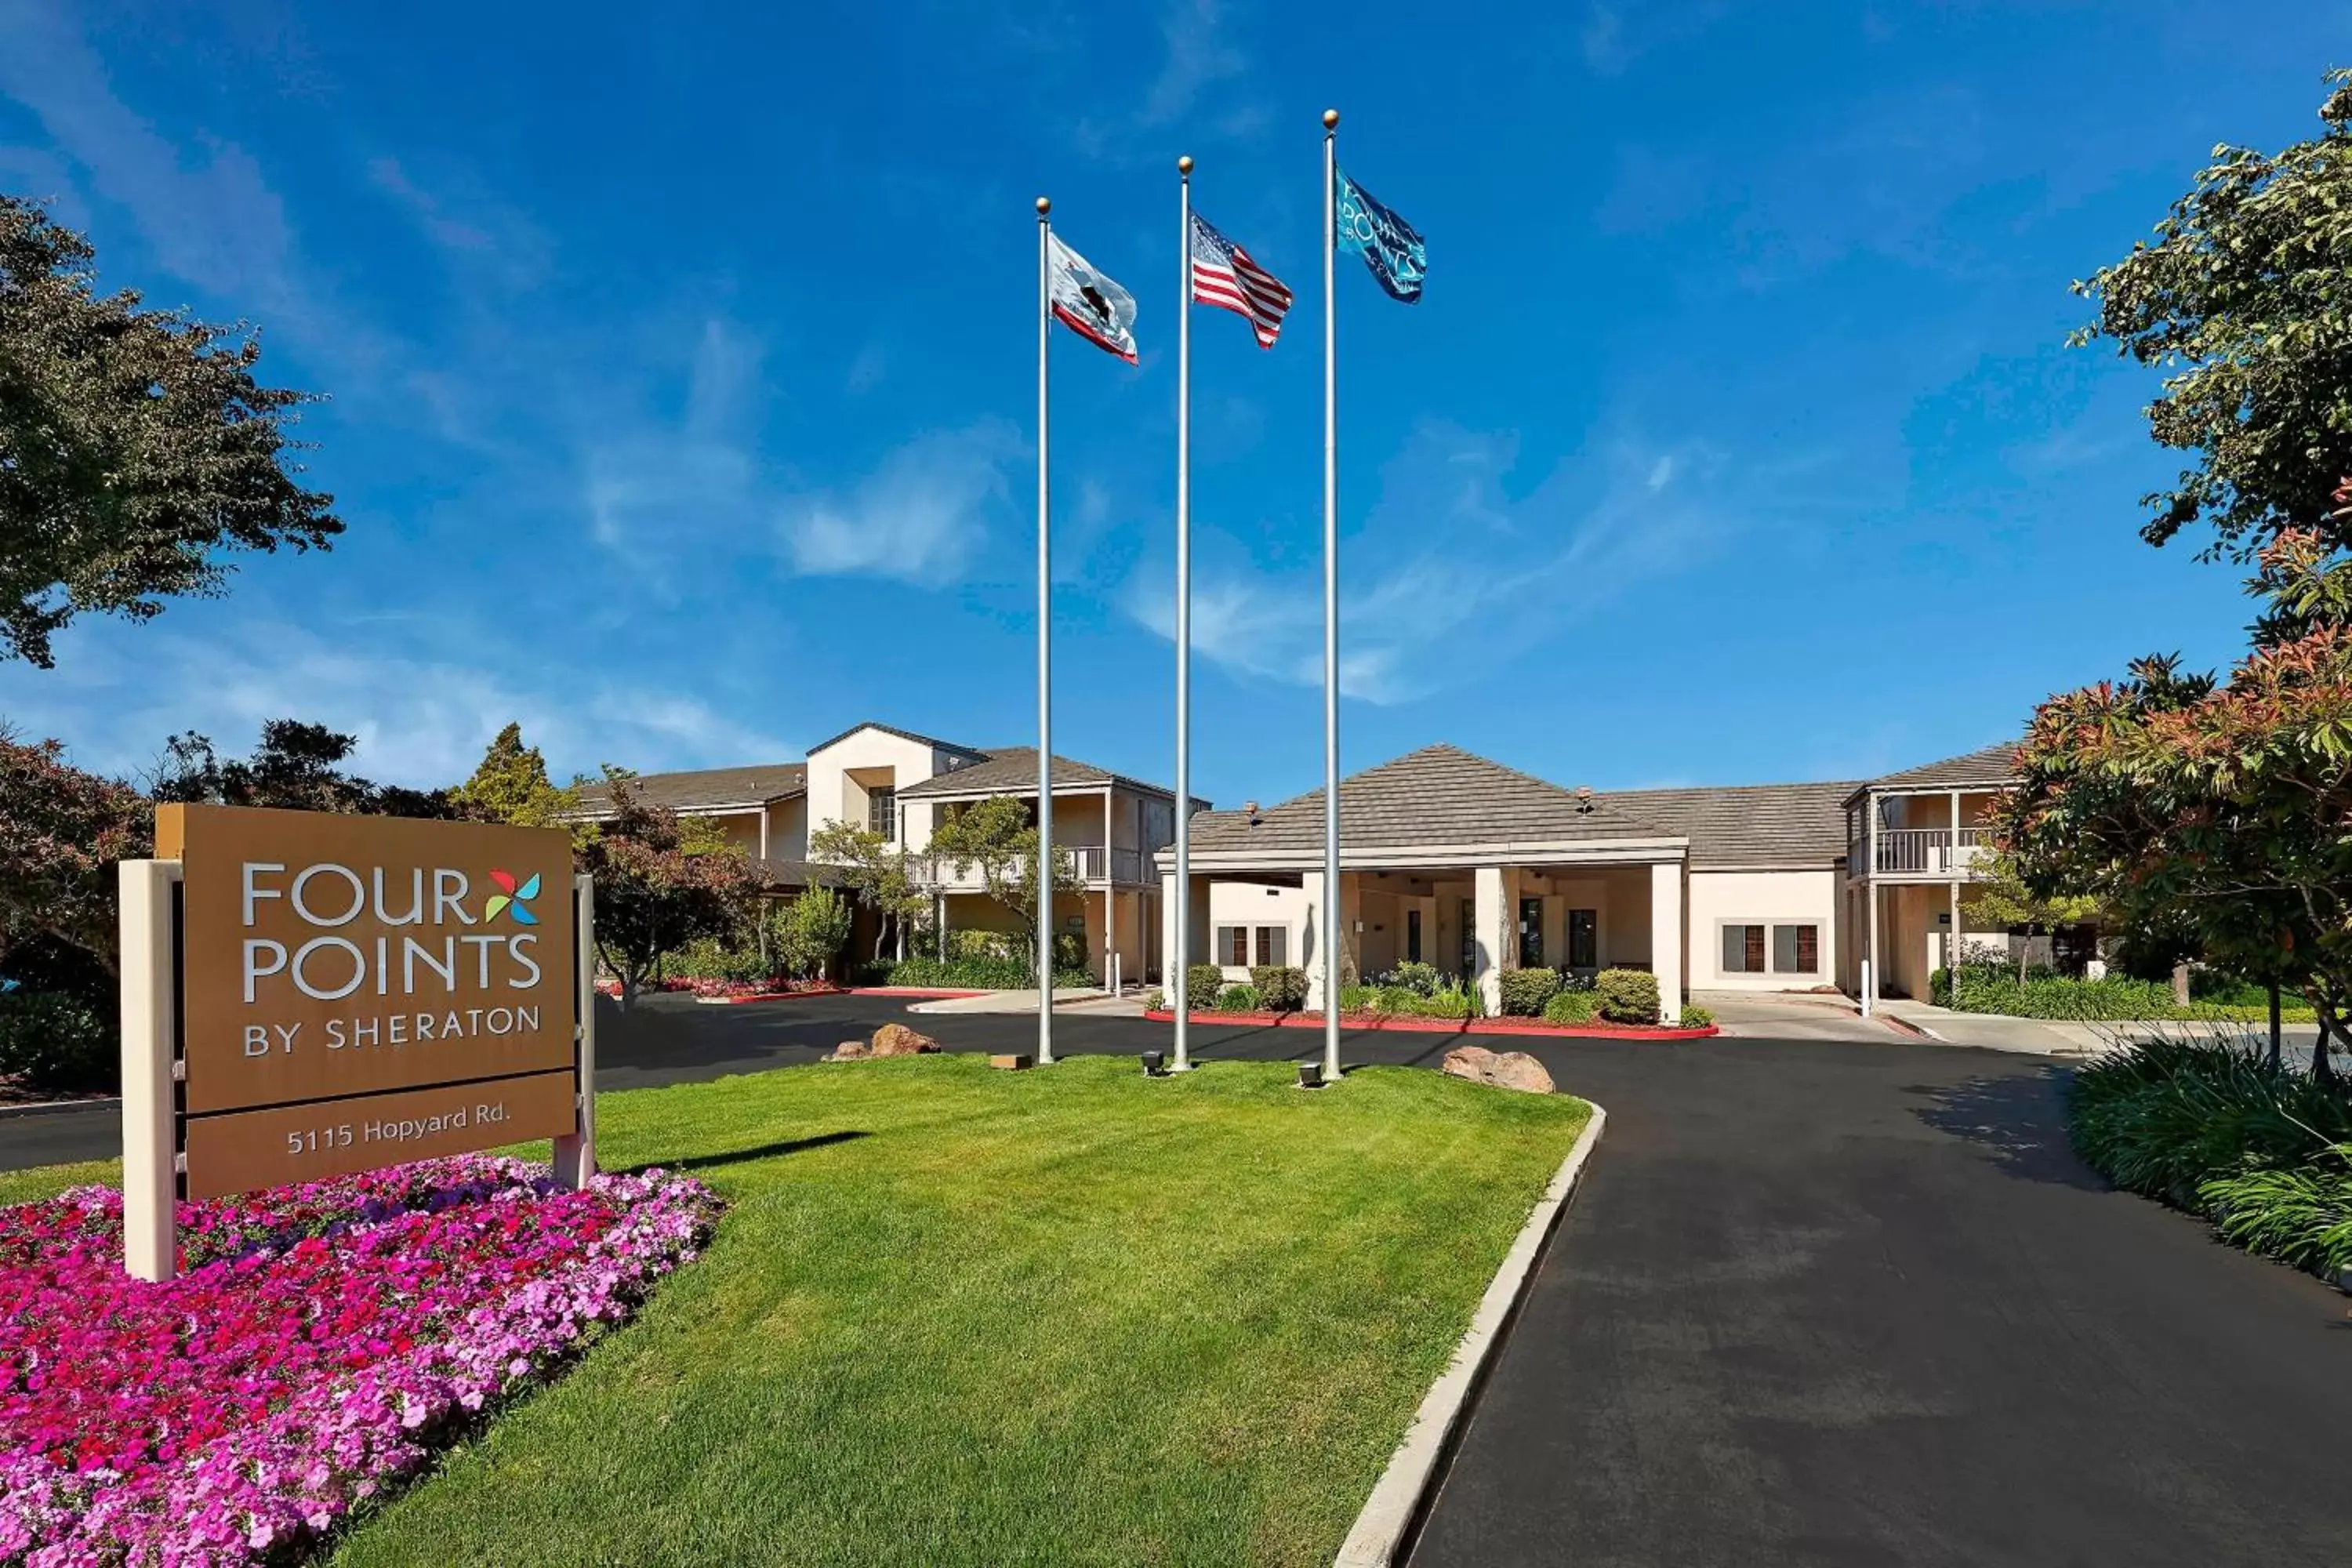 Property Building in Four Points by Sheraton - Pleasanton